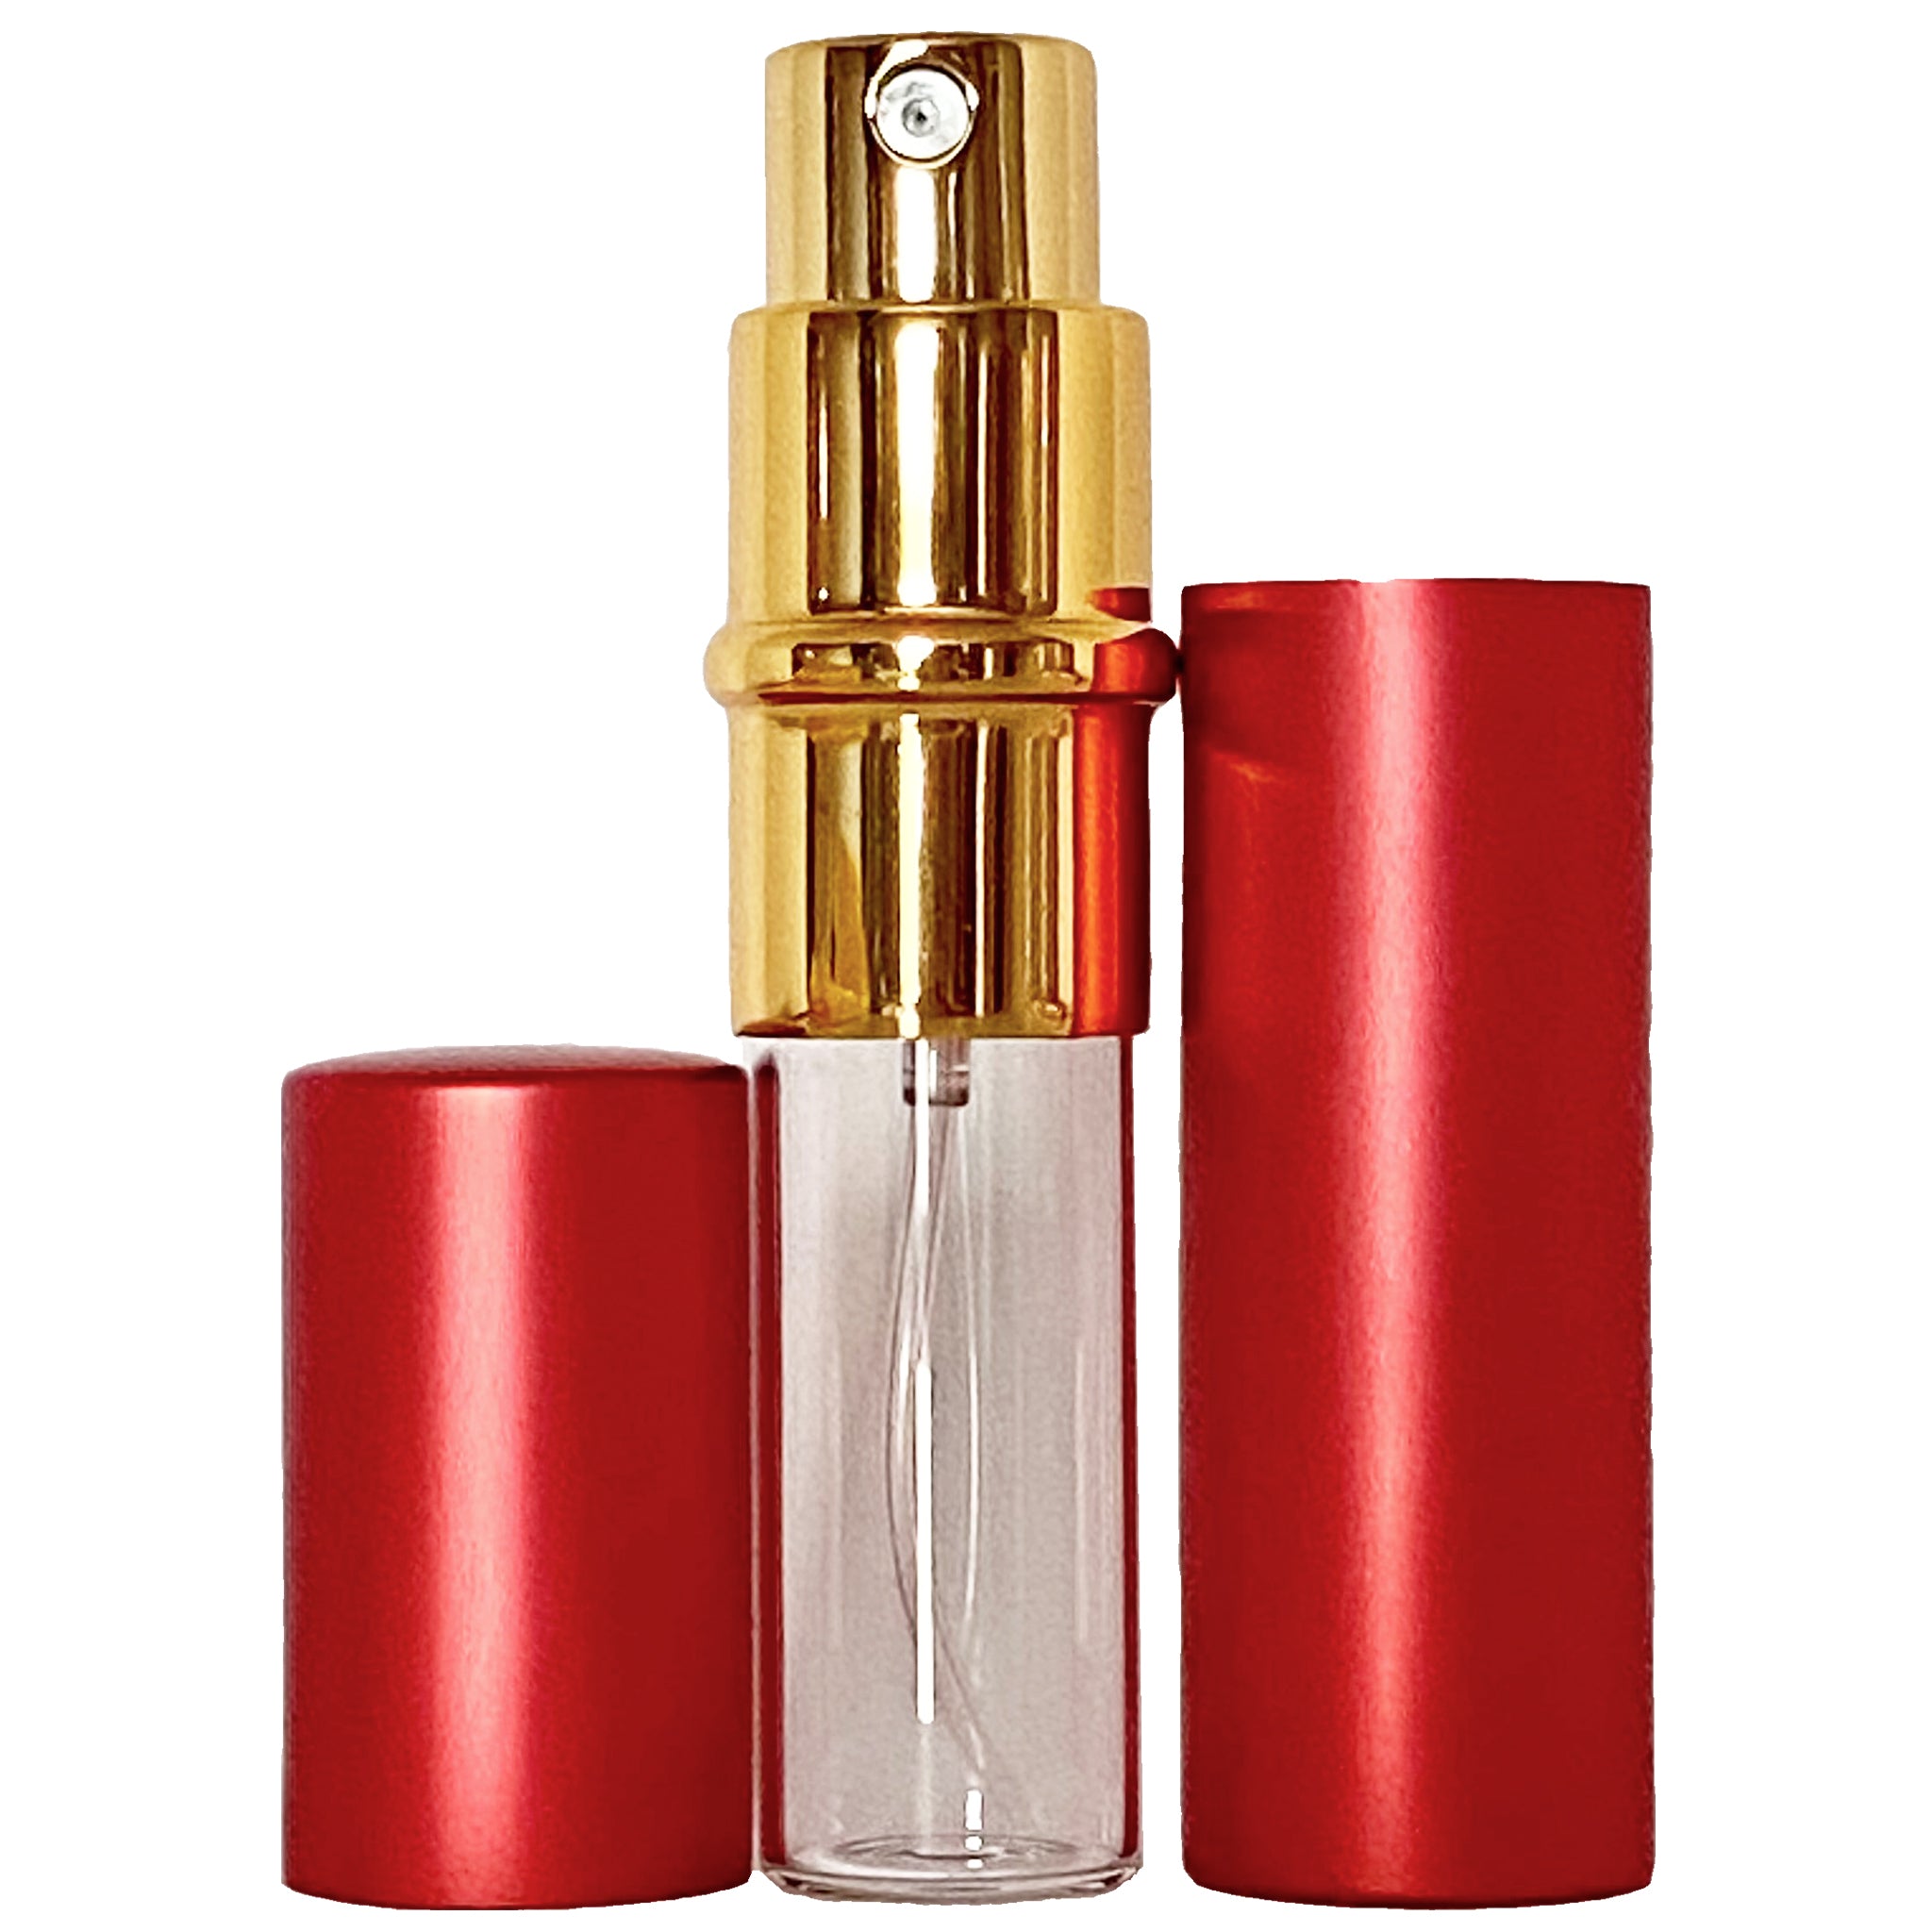 6ml 0.2oz Red Perfume Glass Spray Deluxe Bottles Gold Atomizers